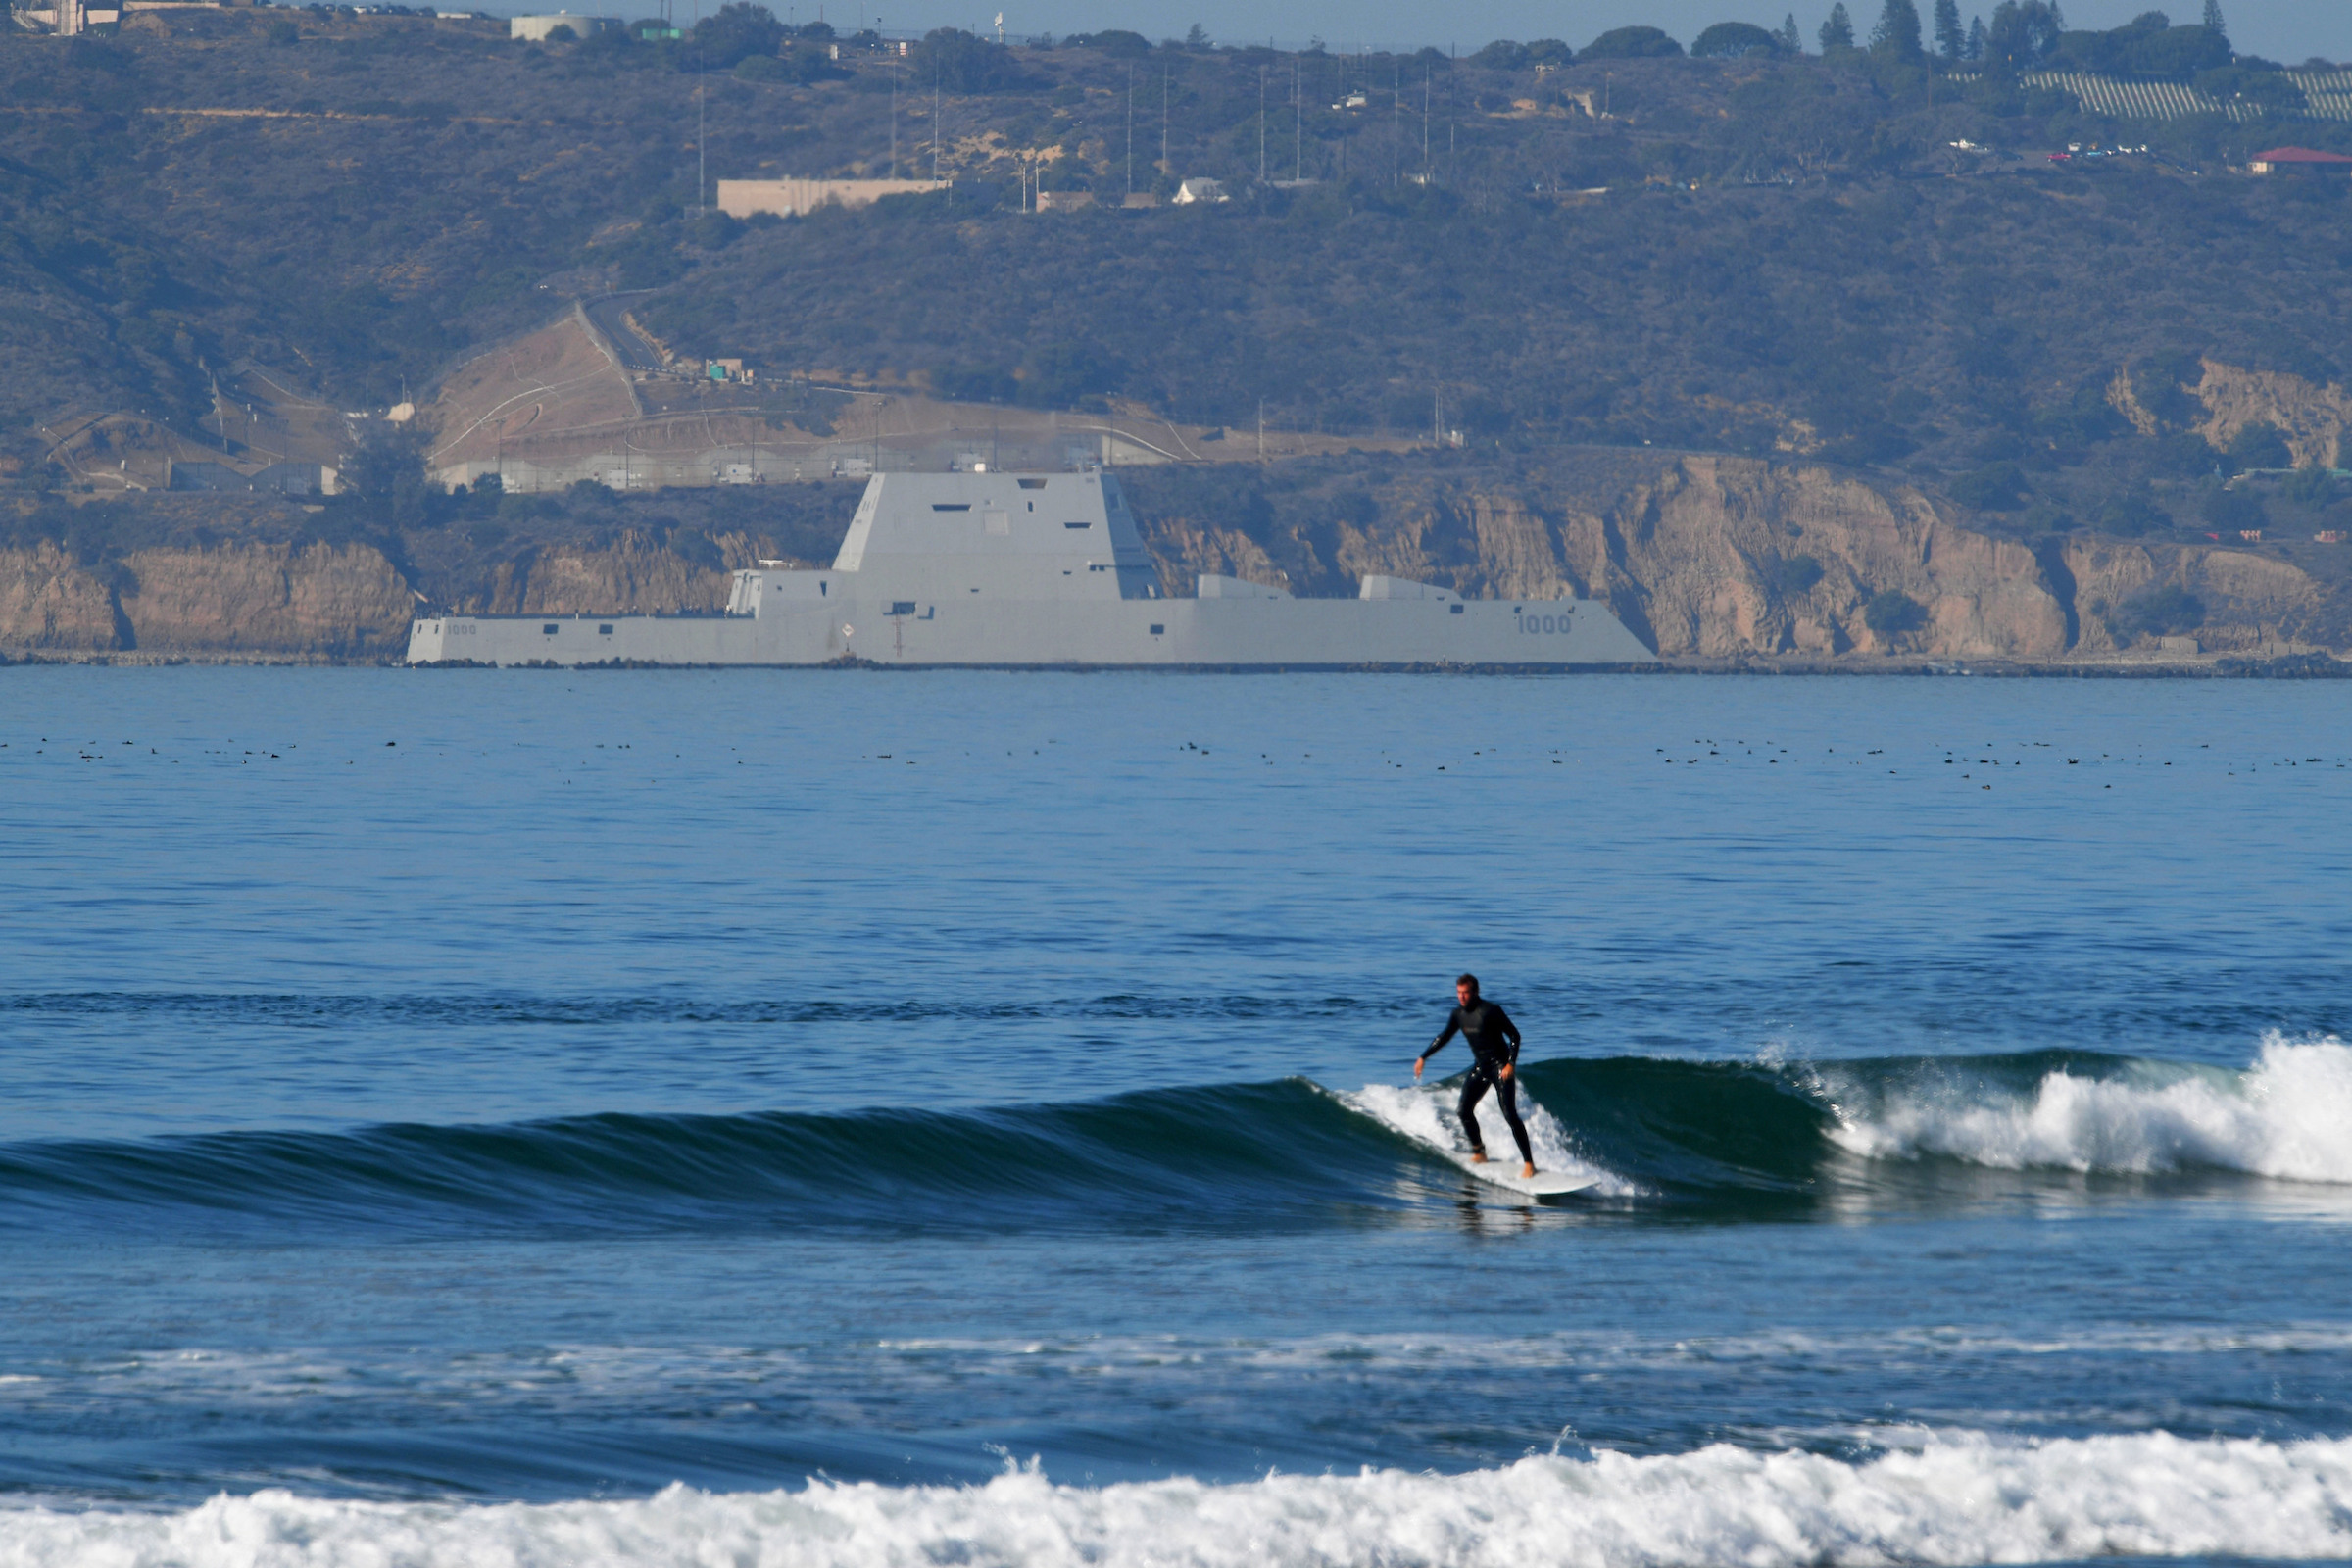 A surfer appears unaware as the USS Zumwalt transits the San Diego channel on its way to her new homeport at Naval Base San Diego on Thursday. (U.S. Navy photo by Petty Officer 2nd Class Timothy M. Black)